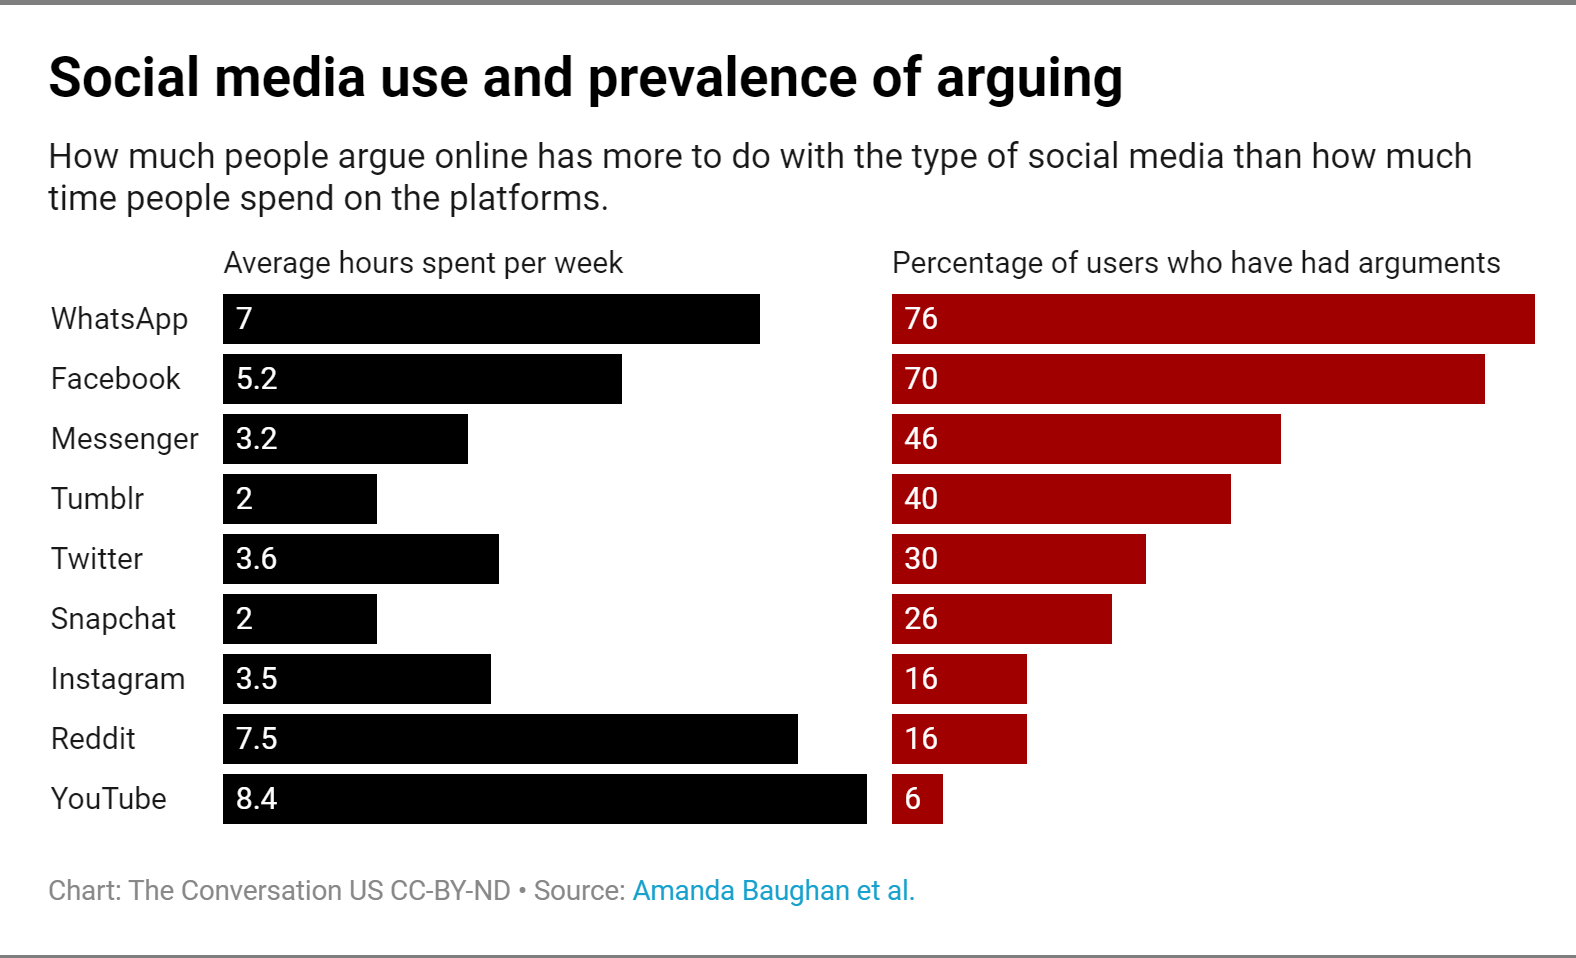 Social media use and prevalence of arguing